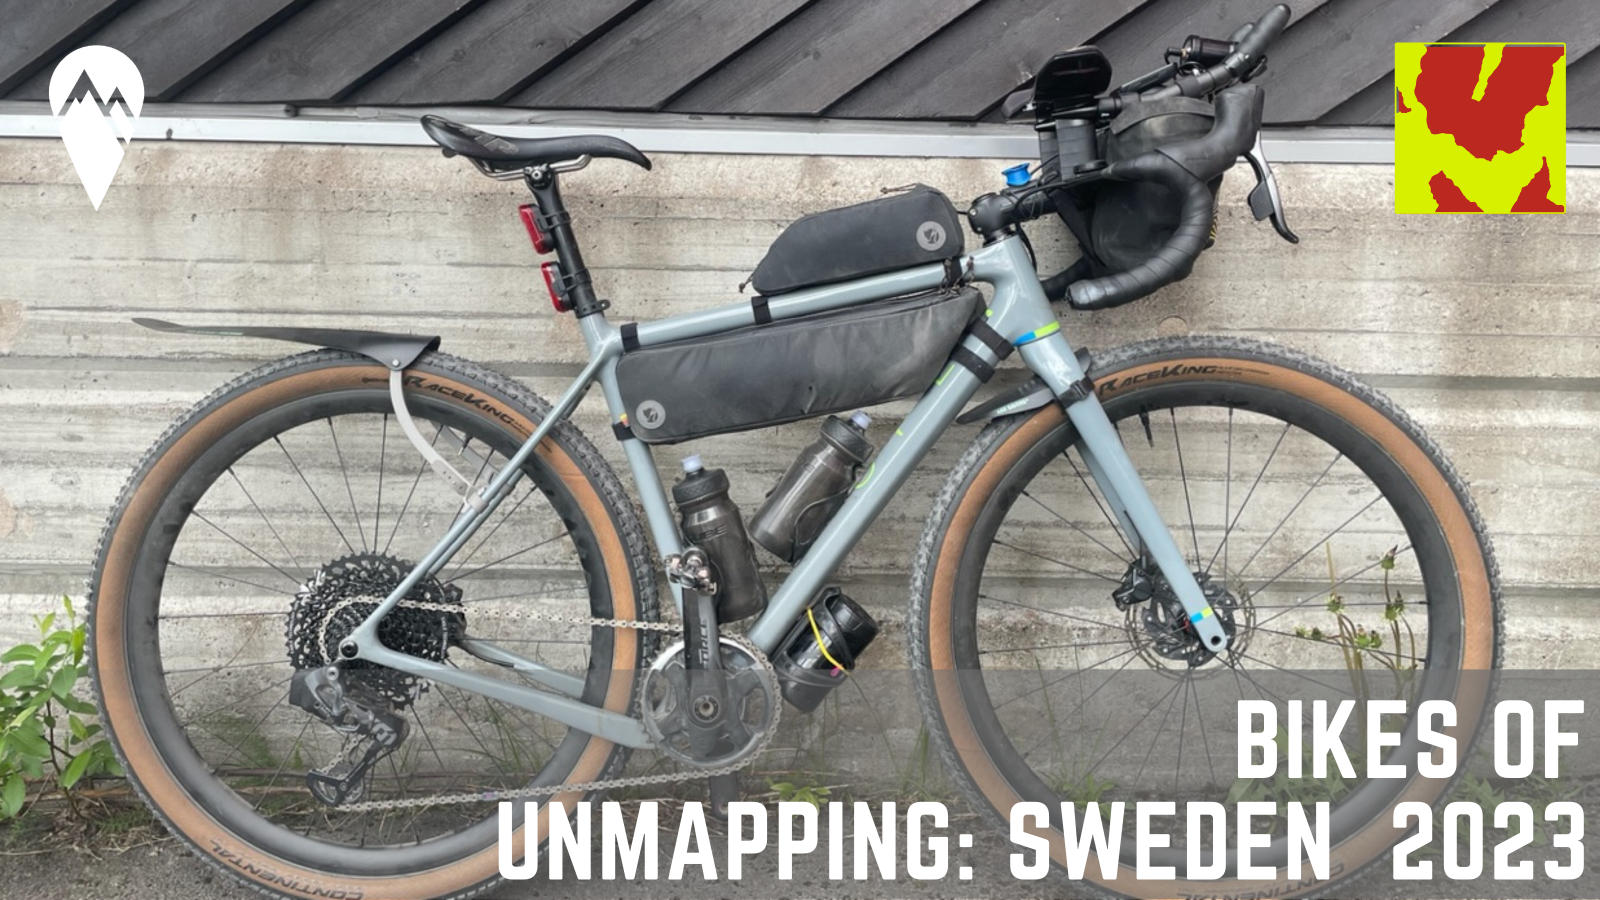 Bikes of Unmapping: Sweden 2023